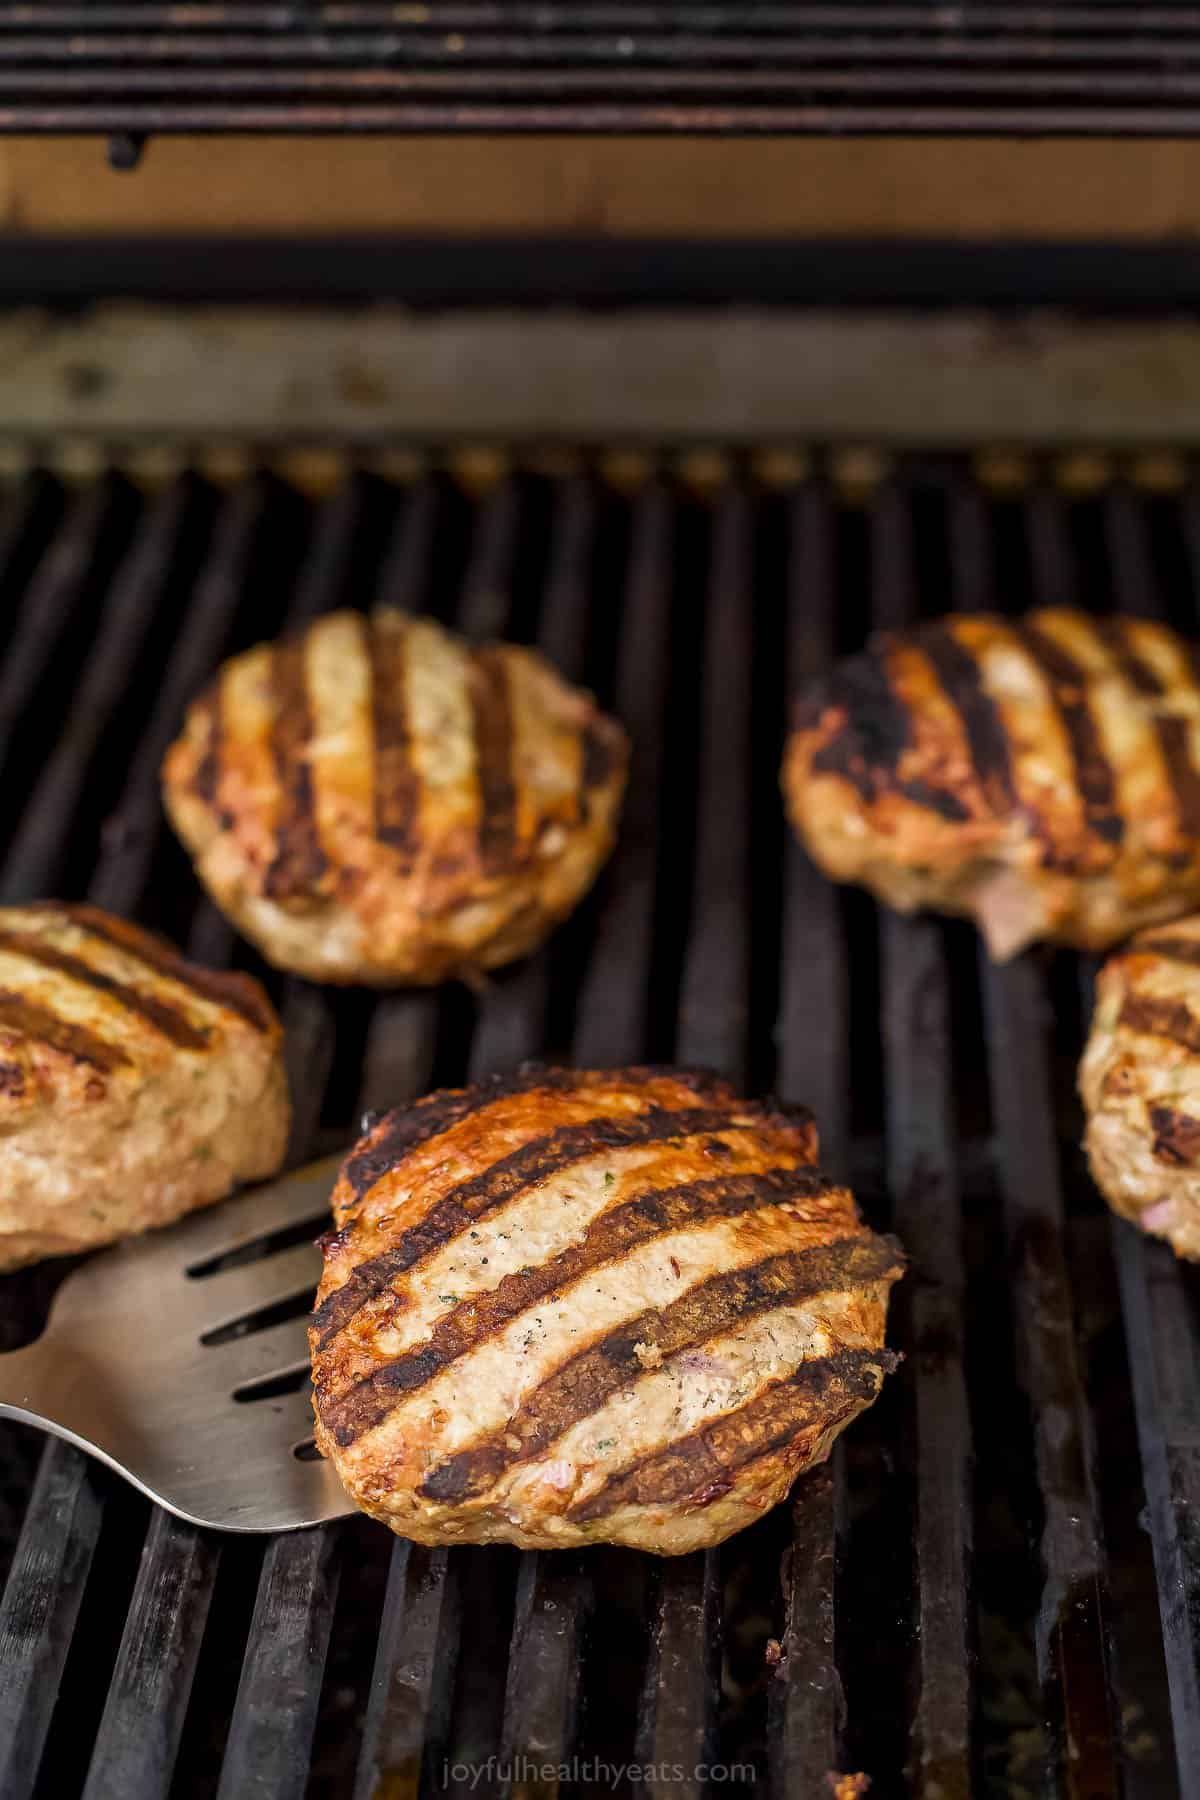 A turkey patty cooking on a grill with a metal spatula slid underneath it to flip it over